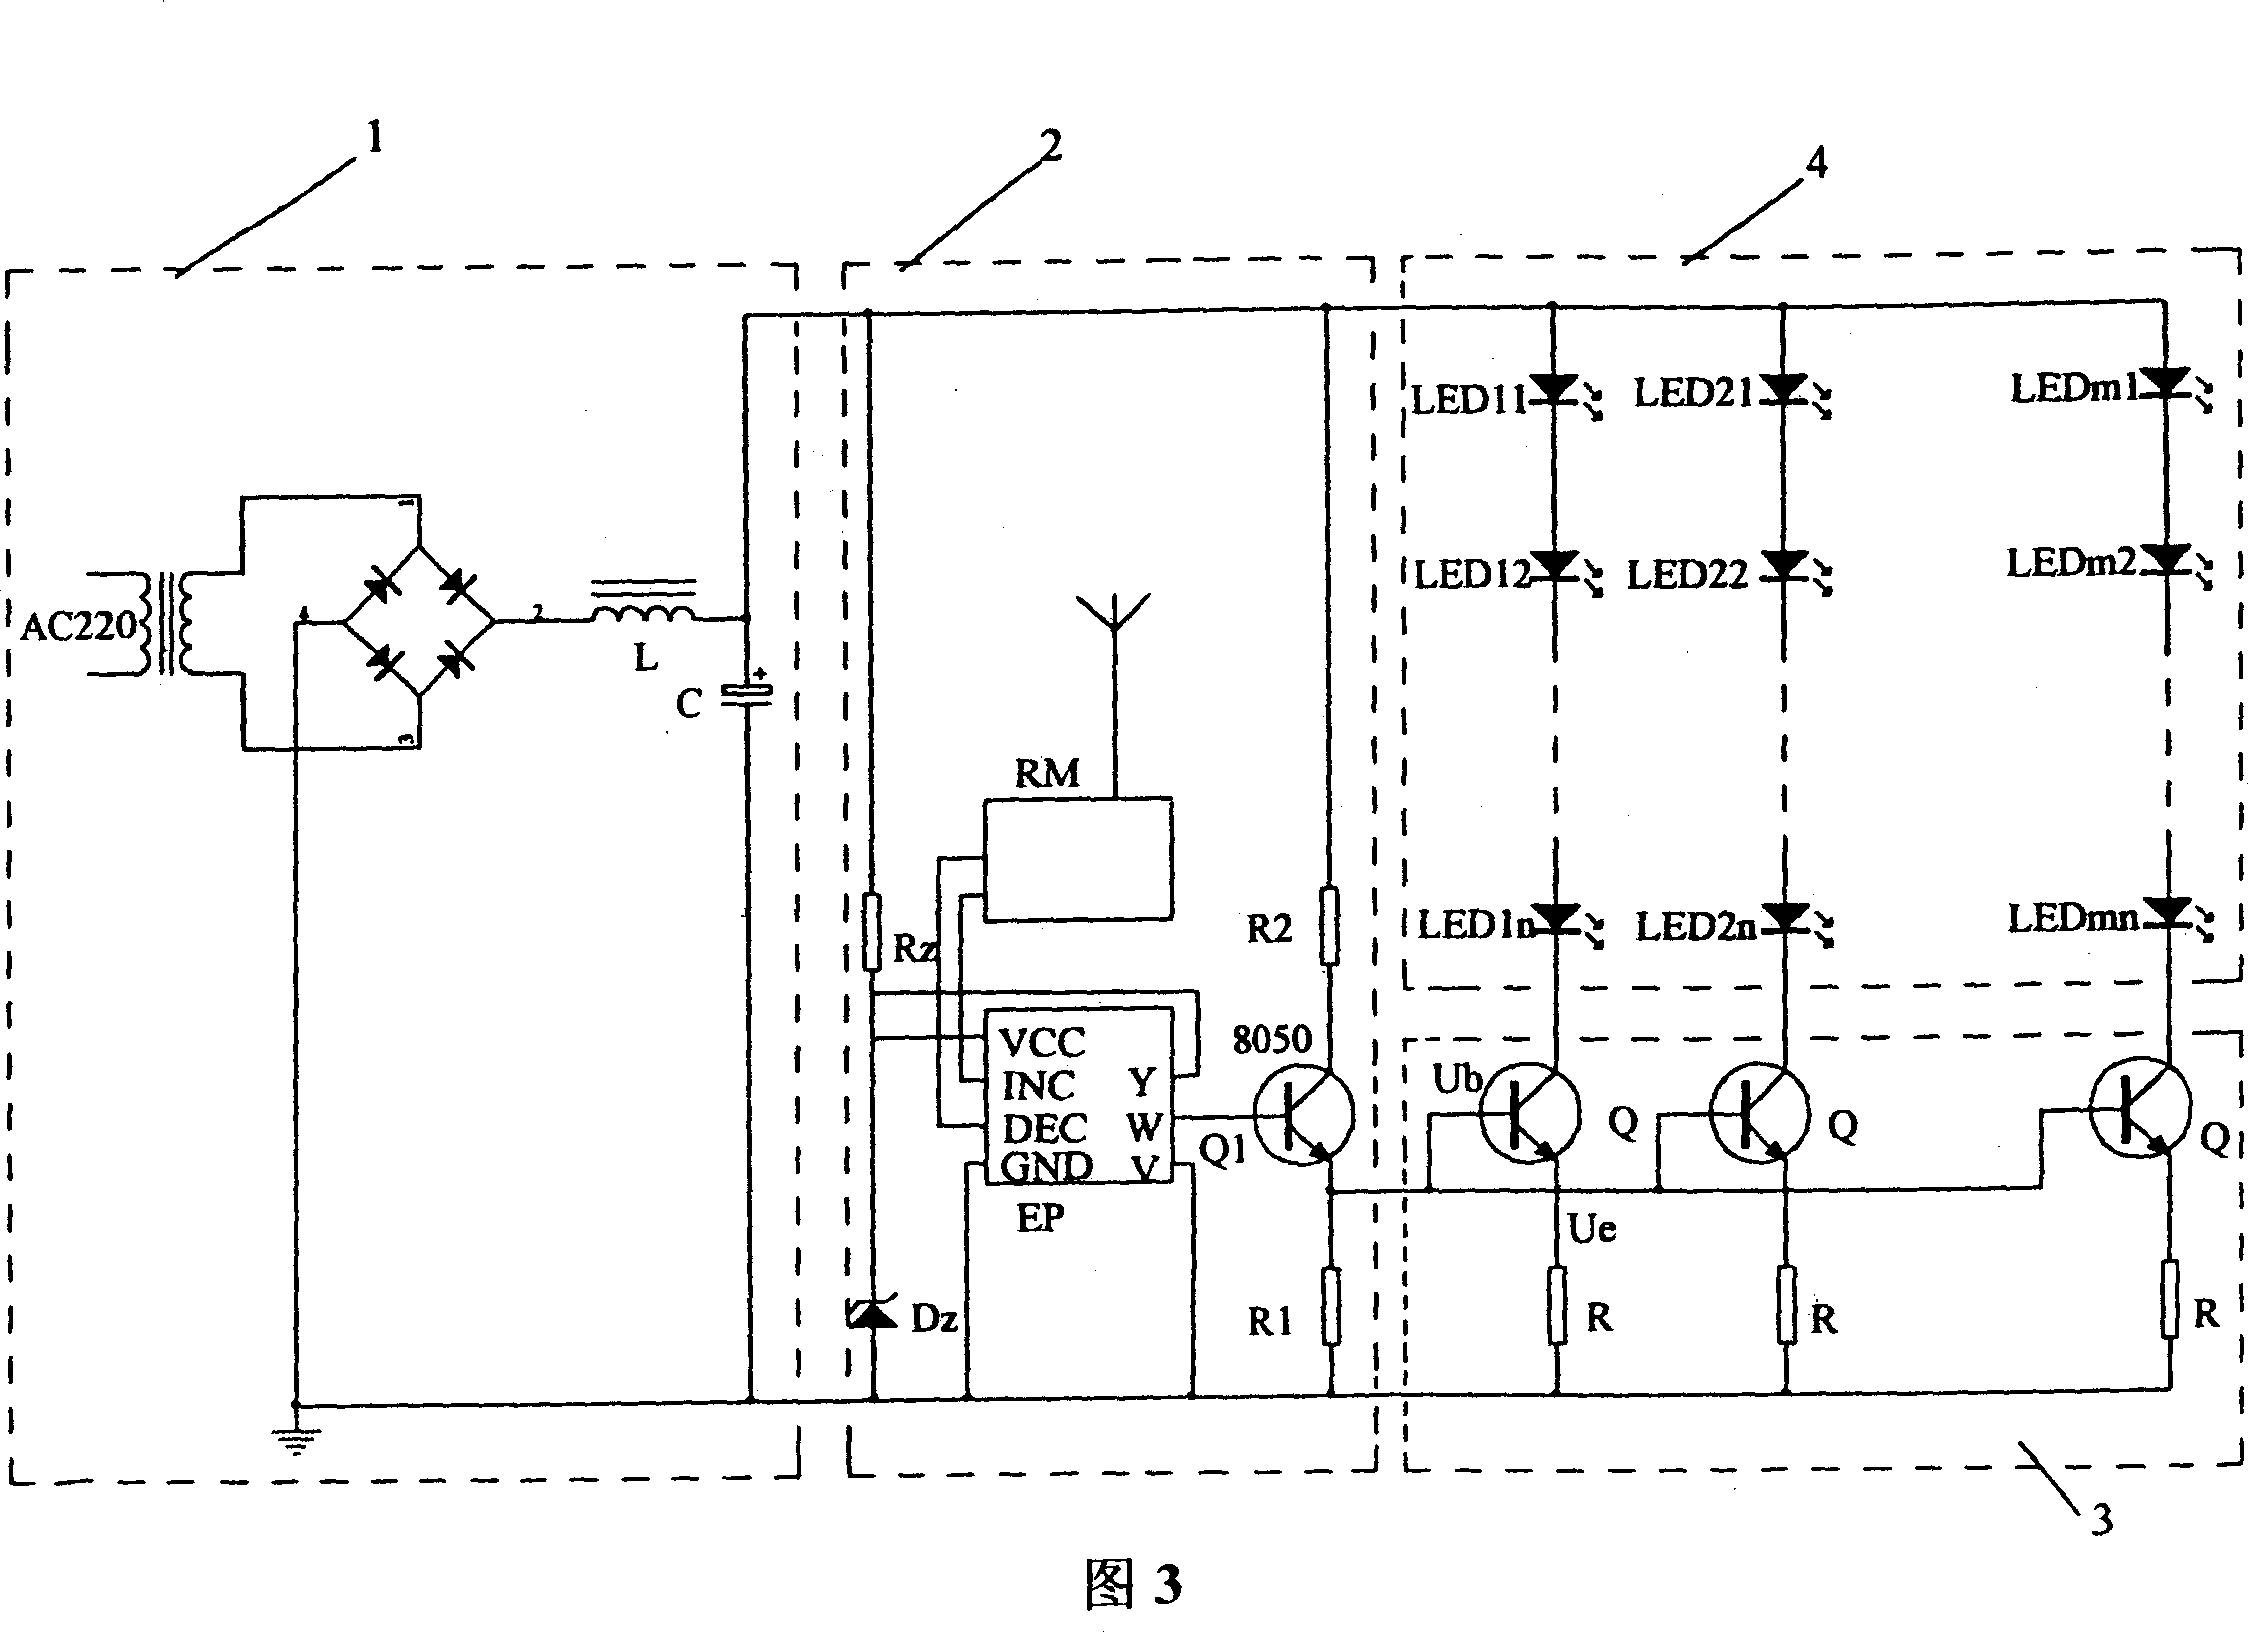 Current constant and light adjusting control circuit for luminescent LED array